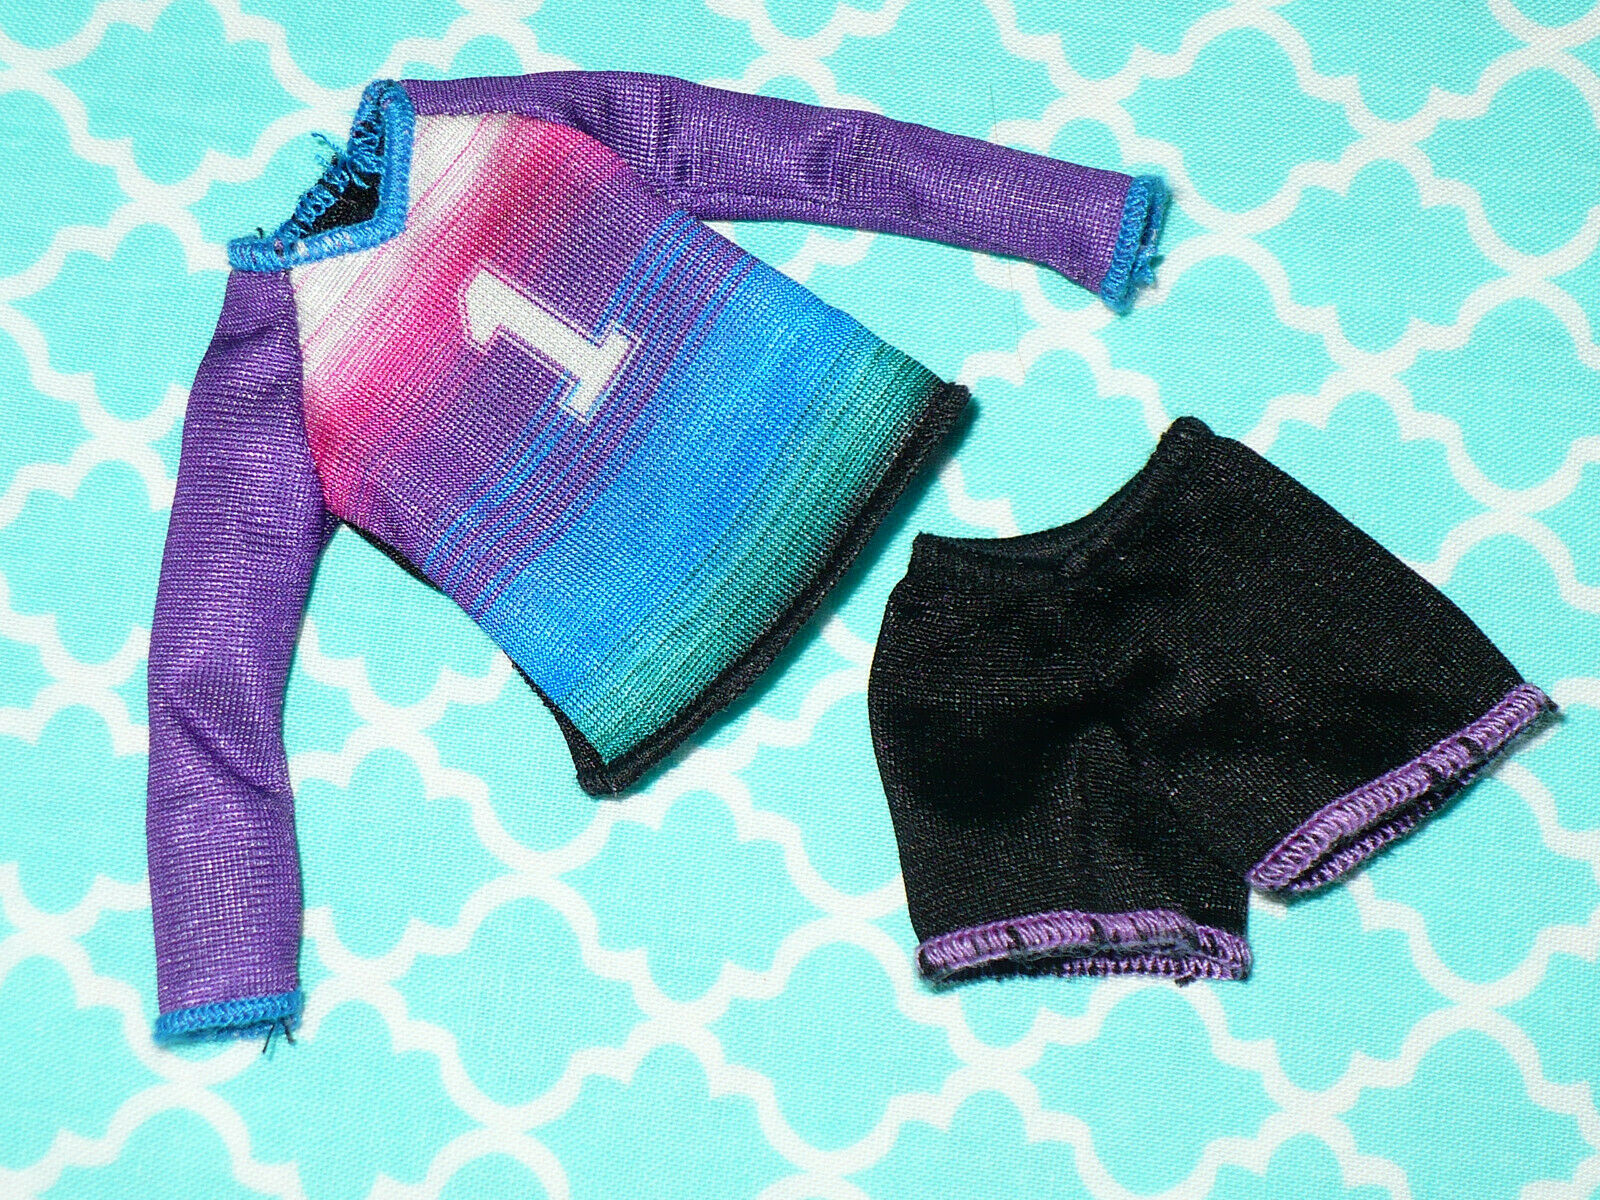 Mattel Barbie Stacie Doll Modern Soccer Clothes Clothing Top Shorts 2 Pc Lot